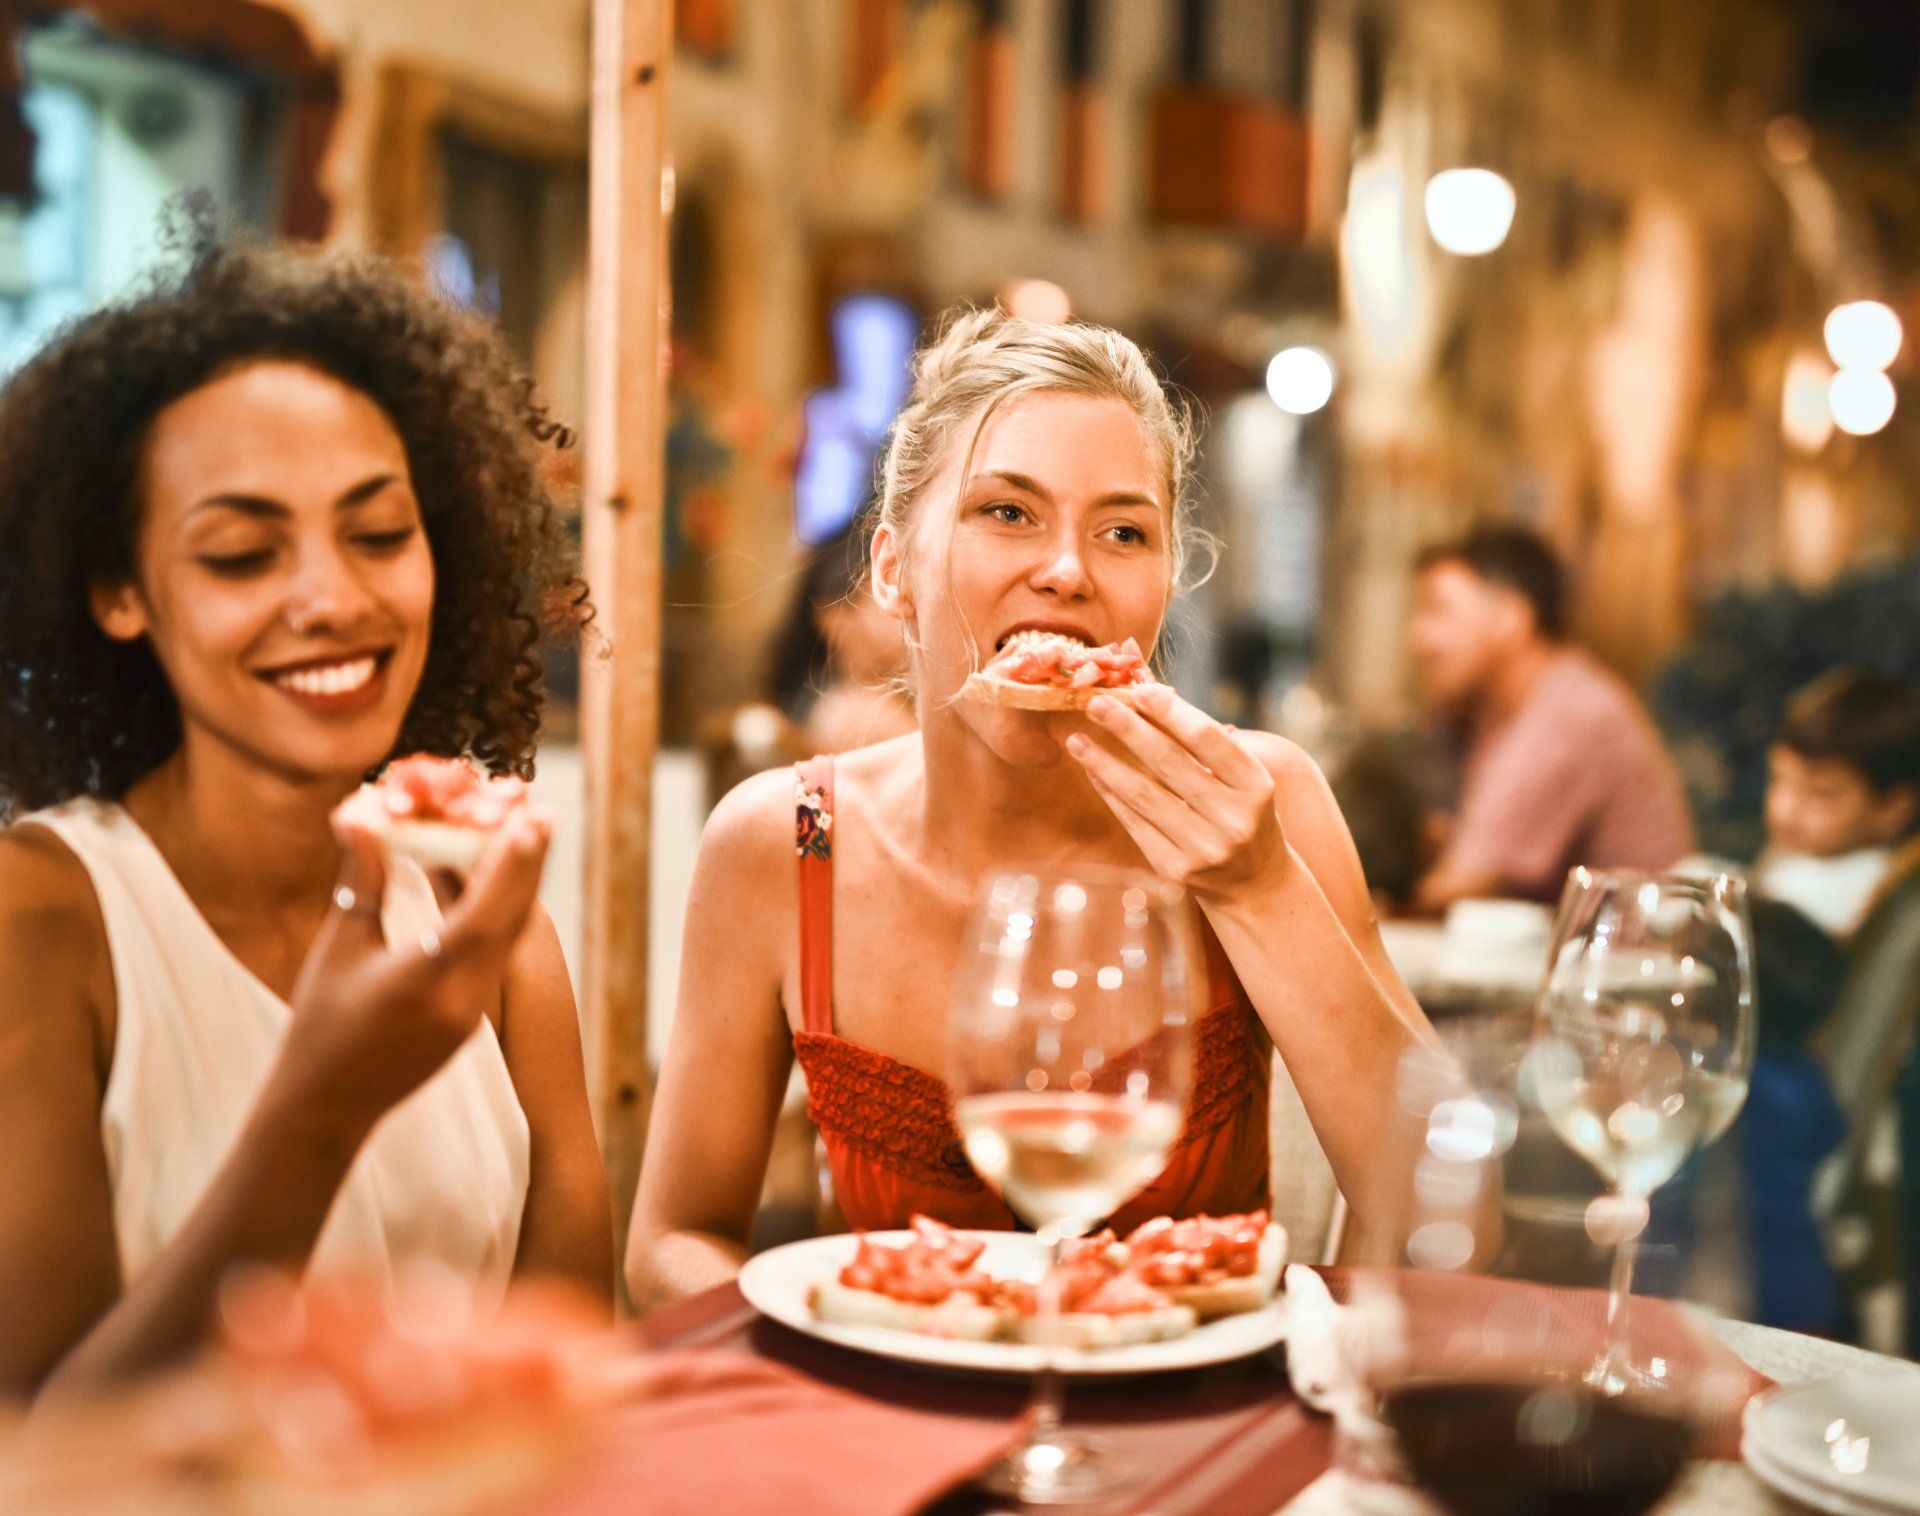 Two women are sitting at a table eating pizza and drinking wine.